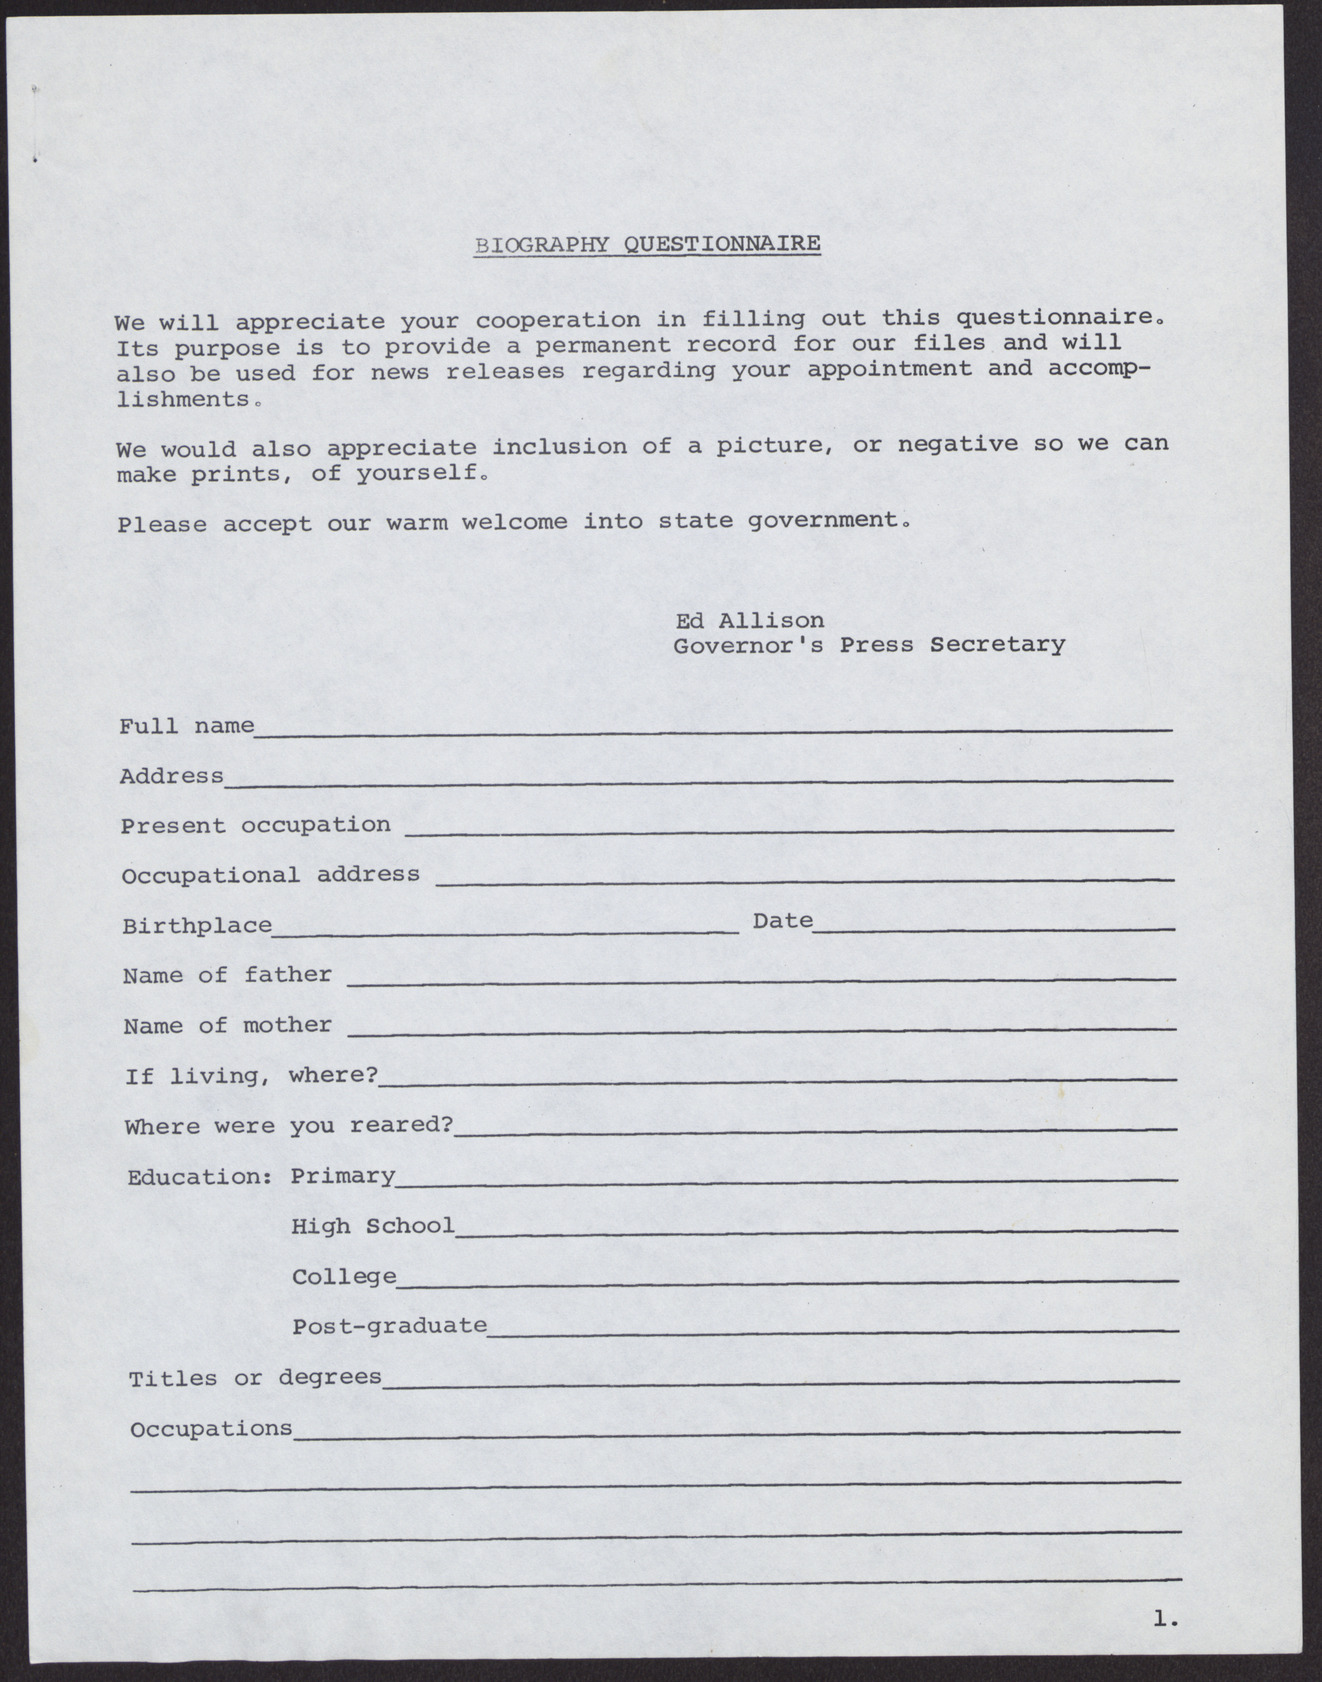 Blank biography questionnaire, no date